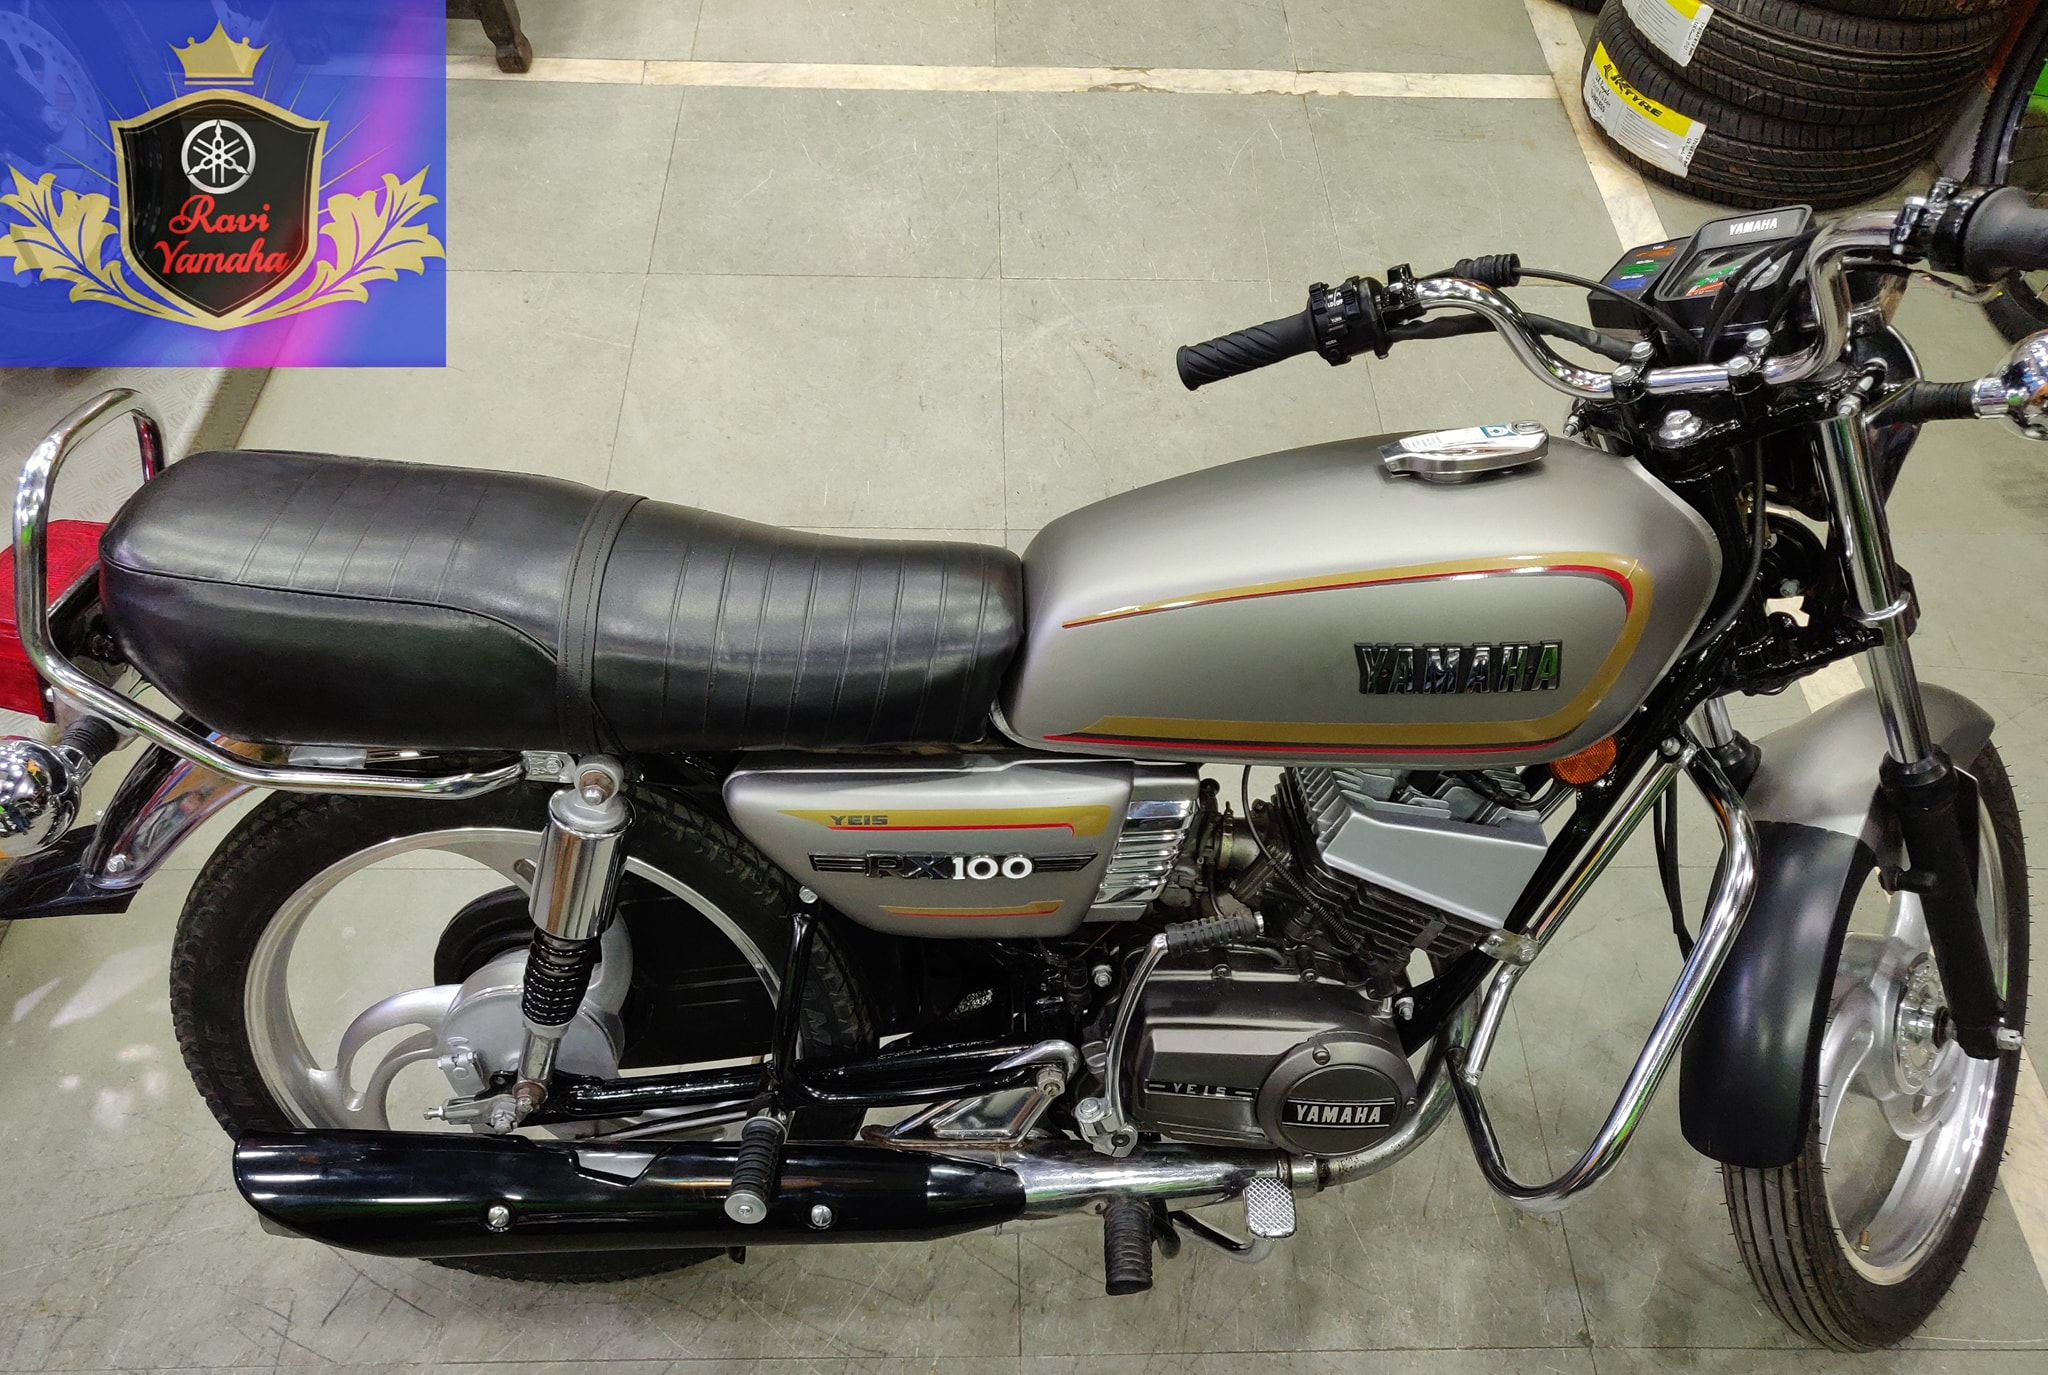 Top 10 Modified Yamaha RX100 Motorcycles in India - Must Check! - view